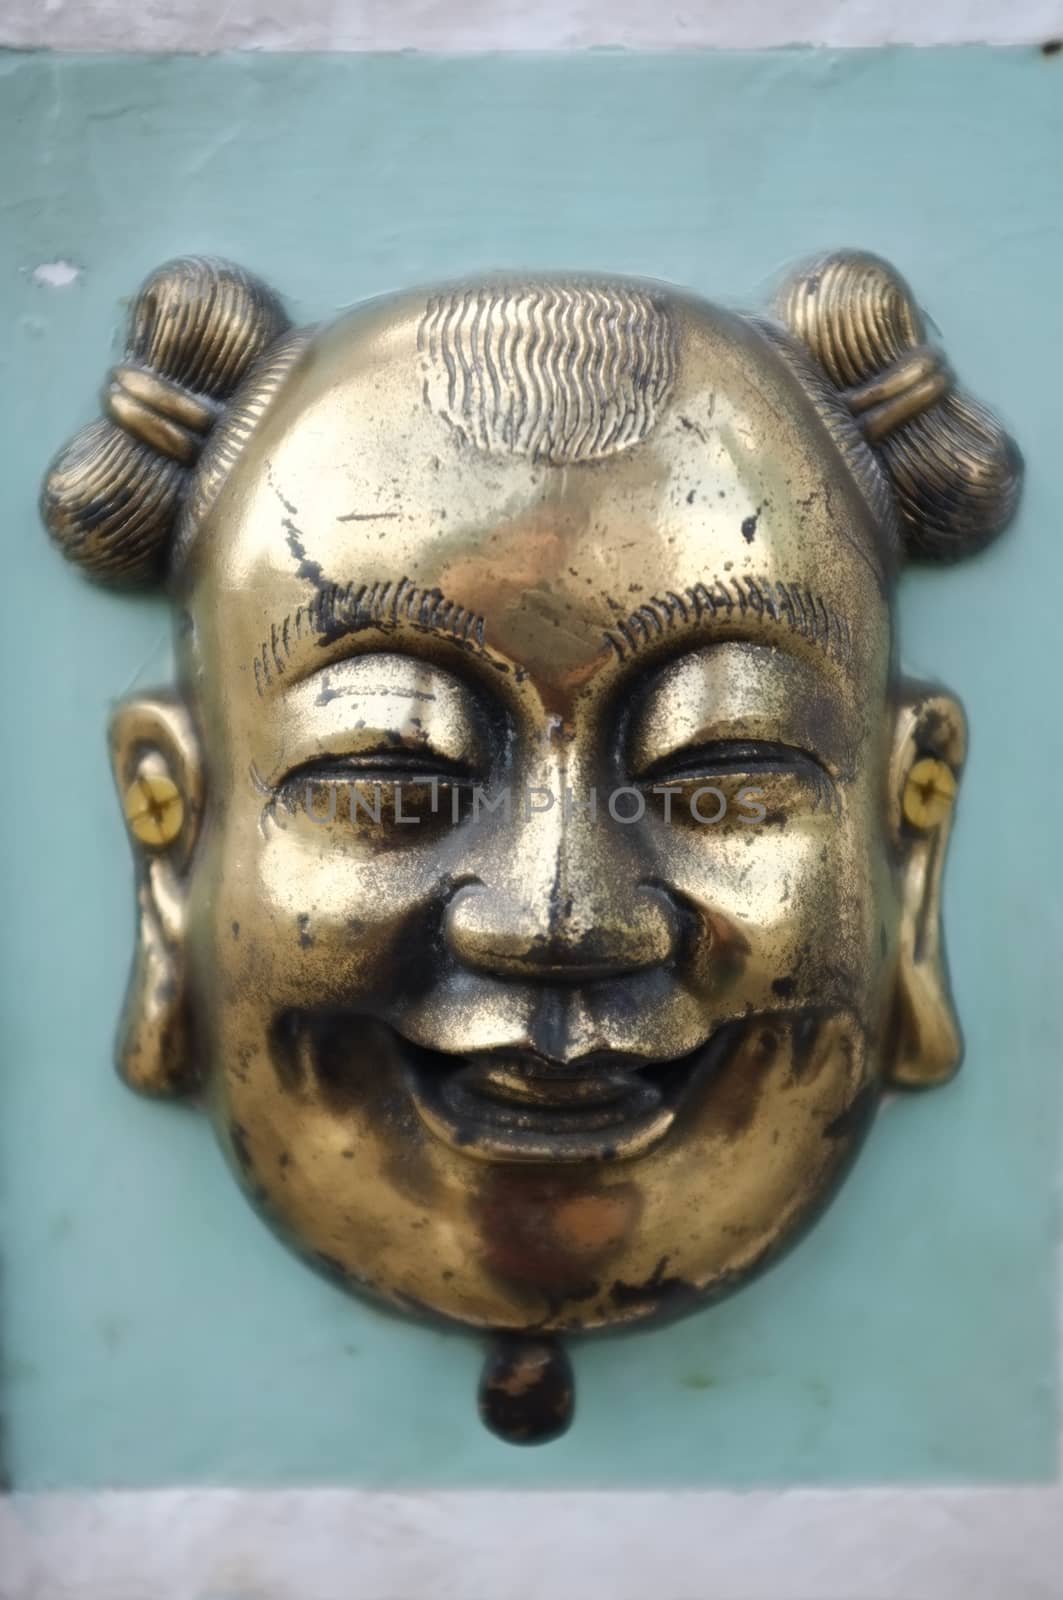 Brass or bronze chinese mask on green cement wall by Hepjam